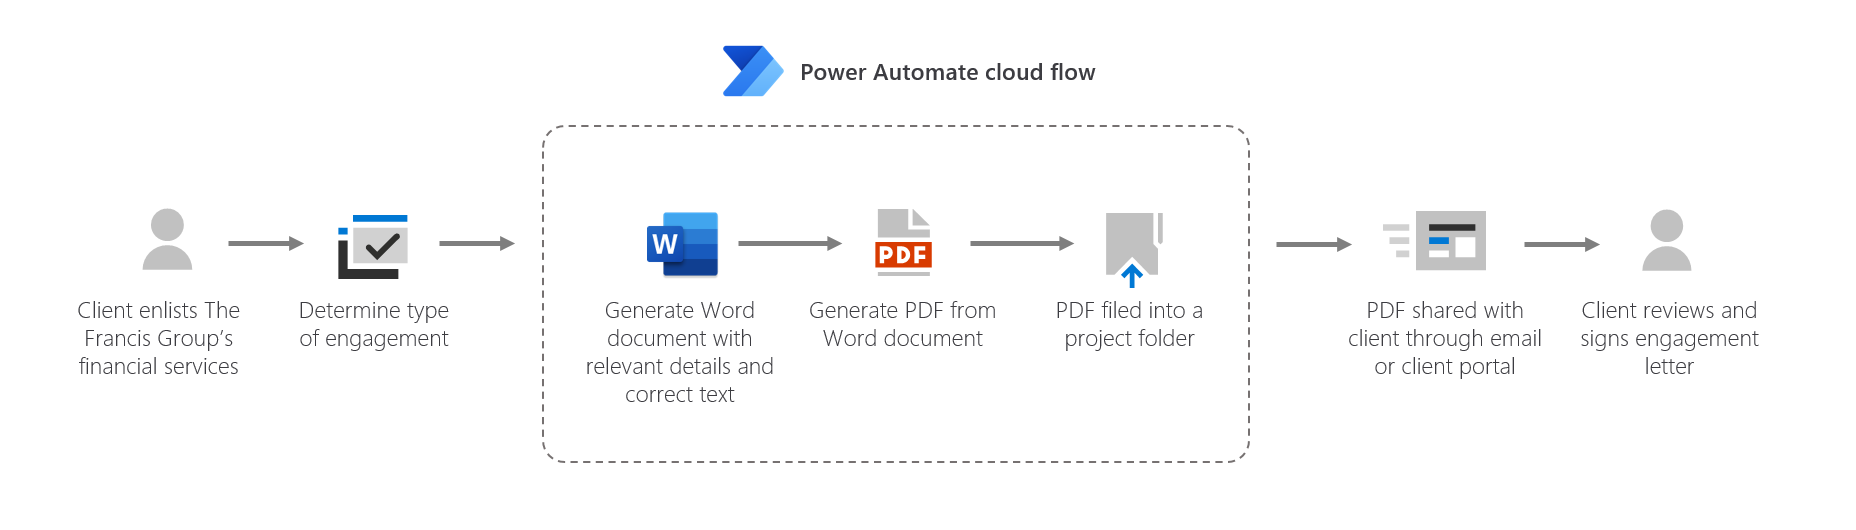 Power Automate cloud flow generates all client engagement letters in less than 1 hour